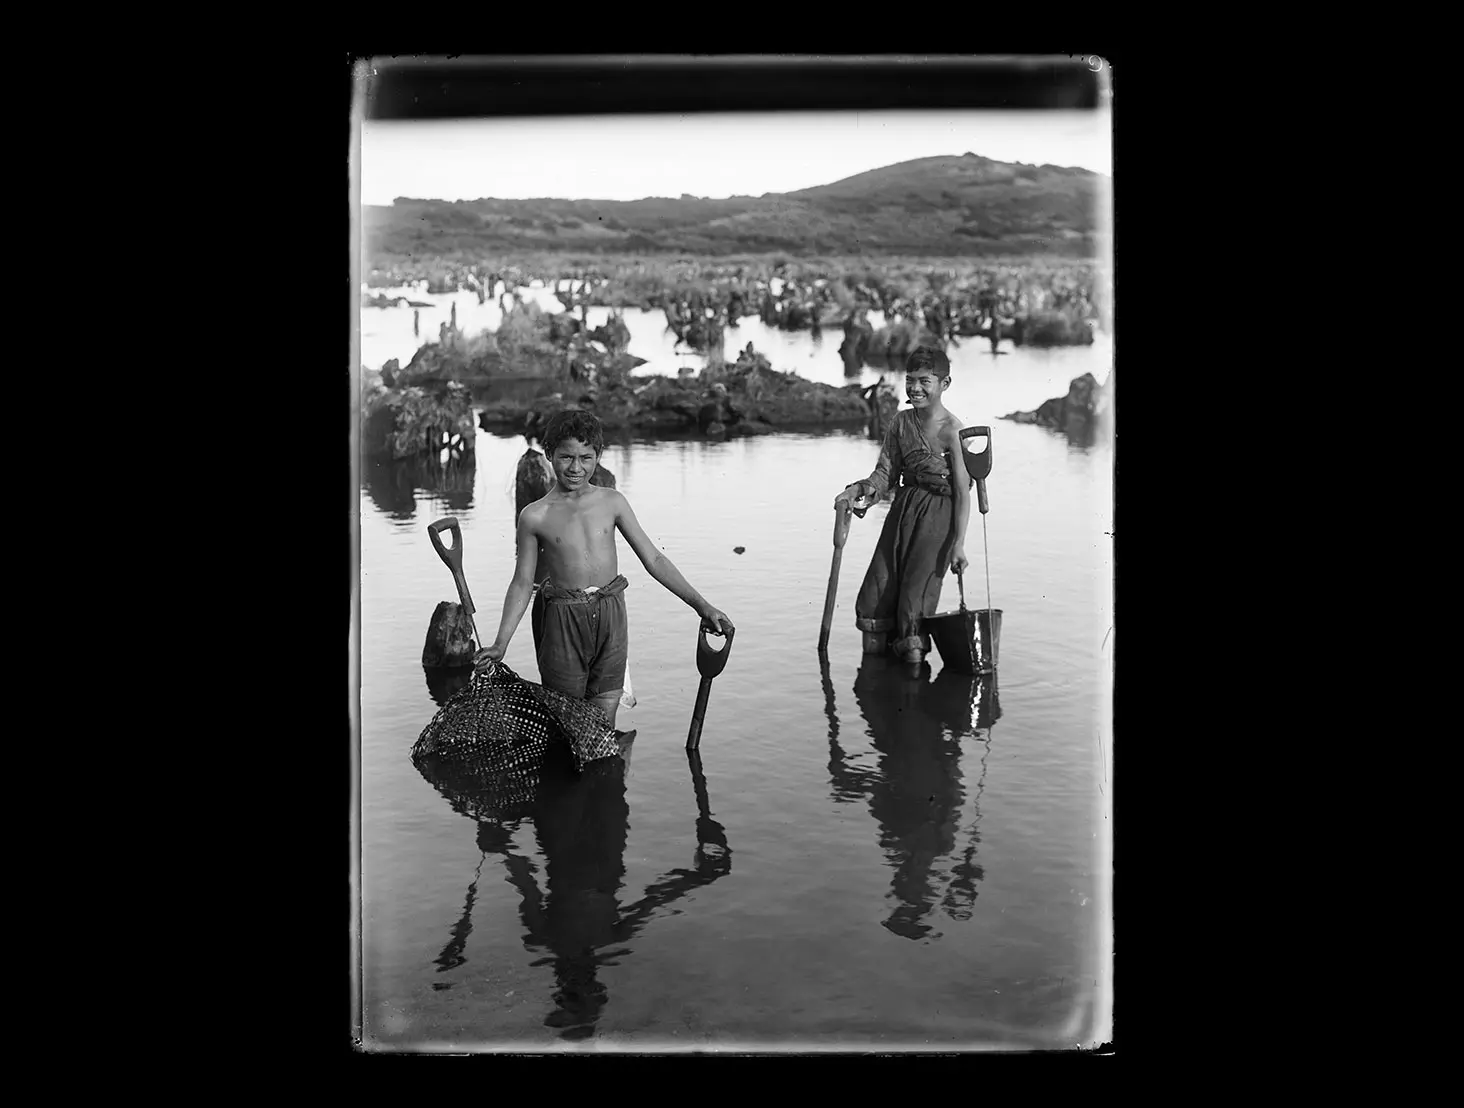 Black and white photo of 2 Māori boys working in a swamp to find kauri gum. They are standing in water with their tools (including spades, spears and a bucket).